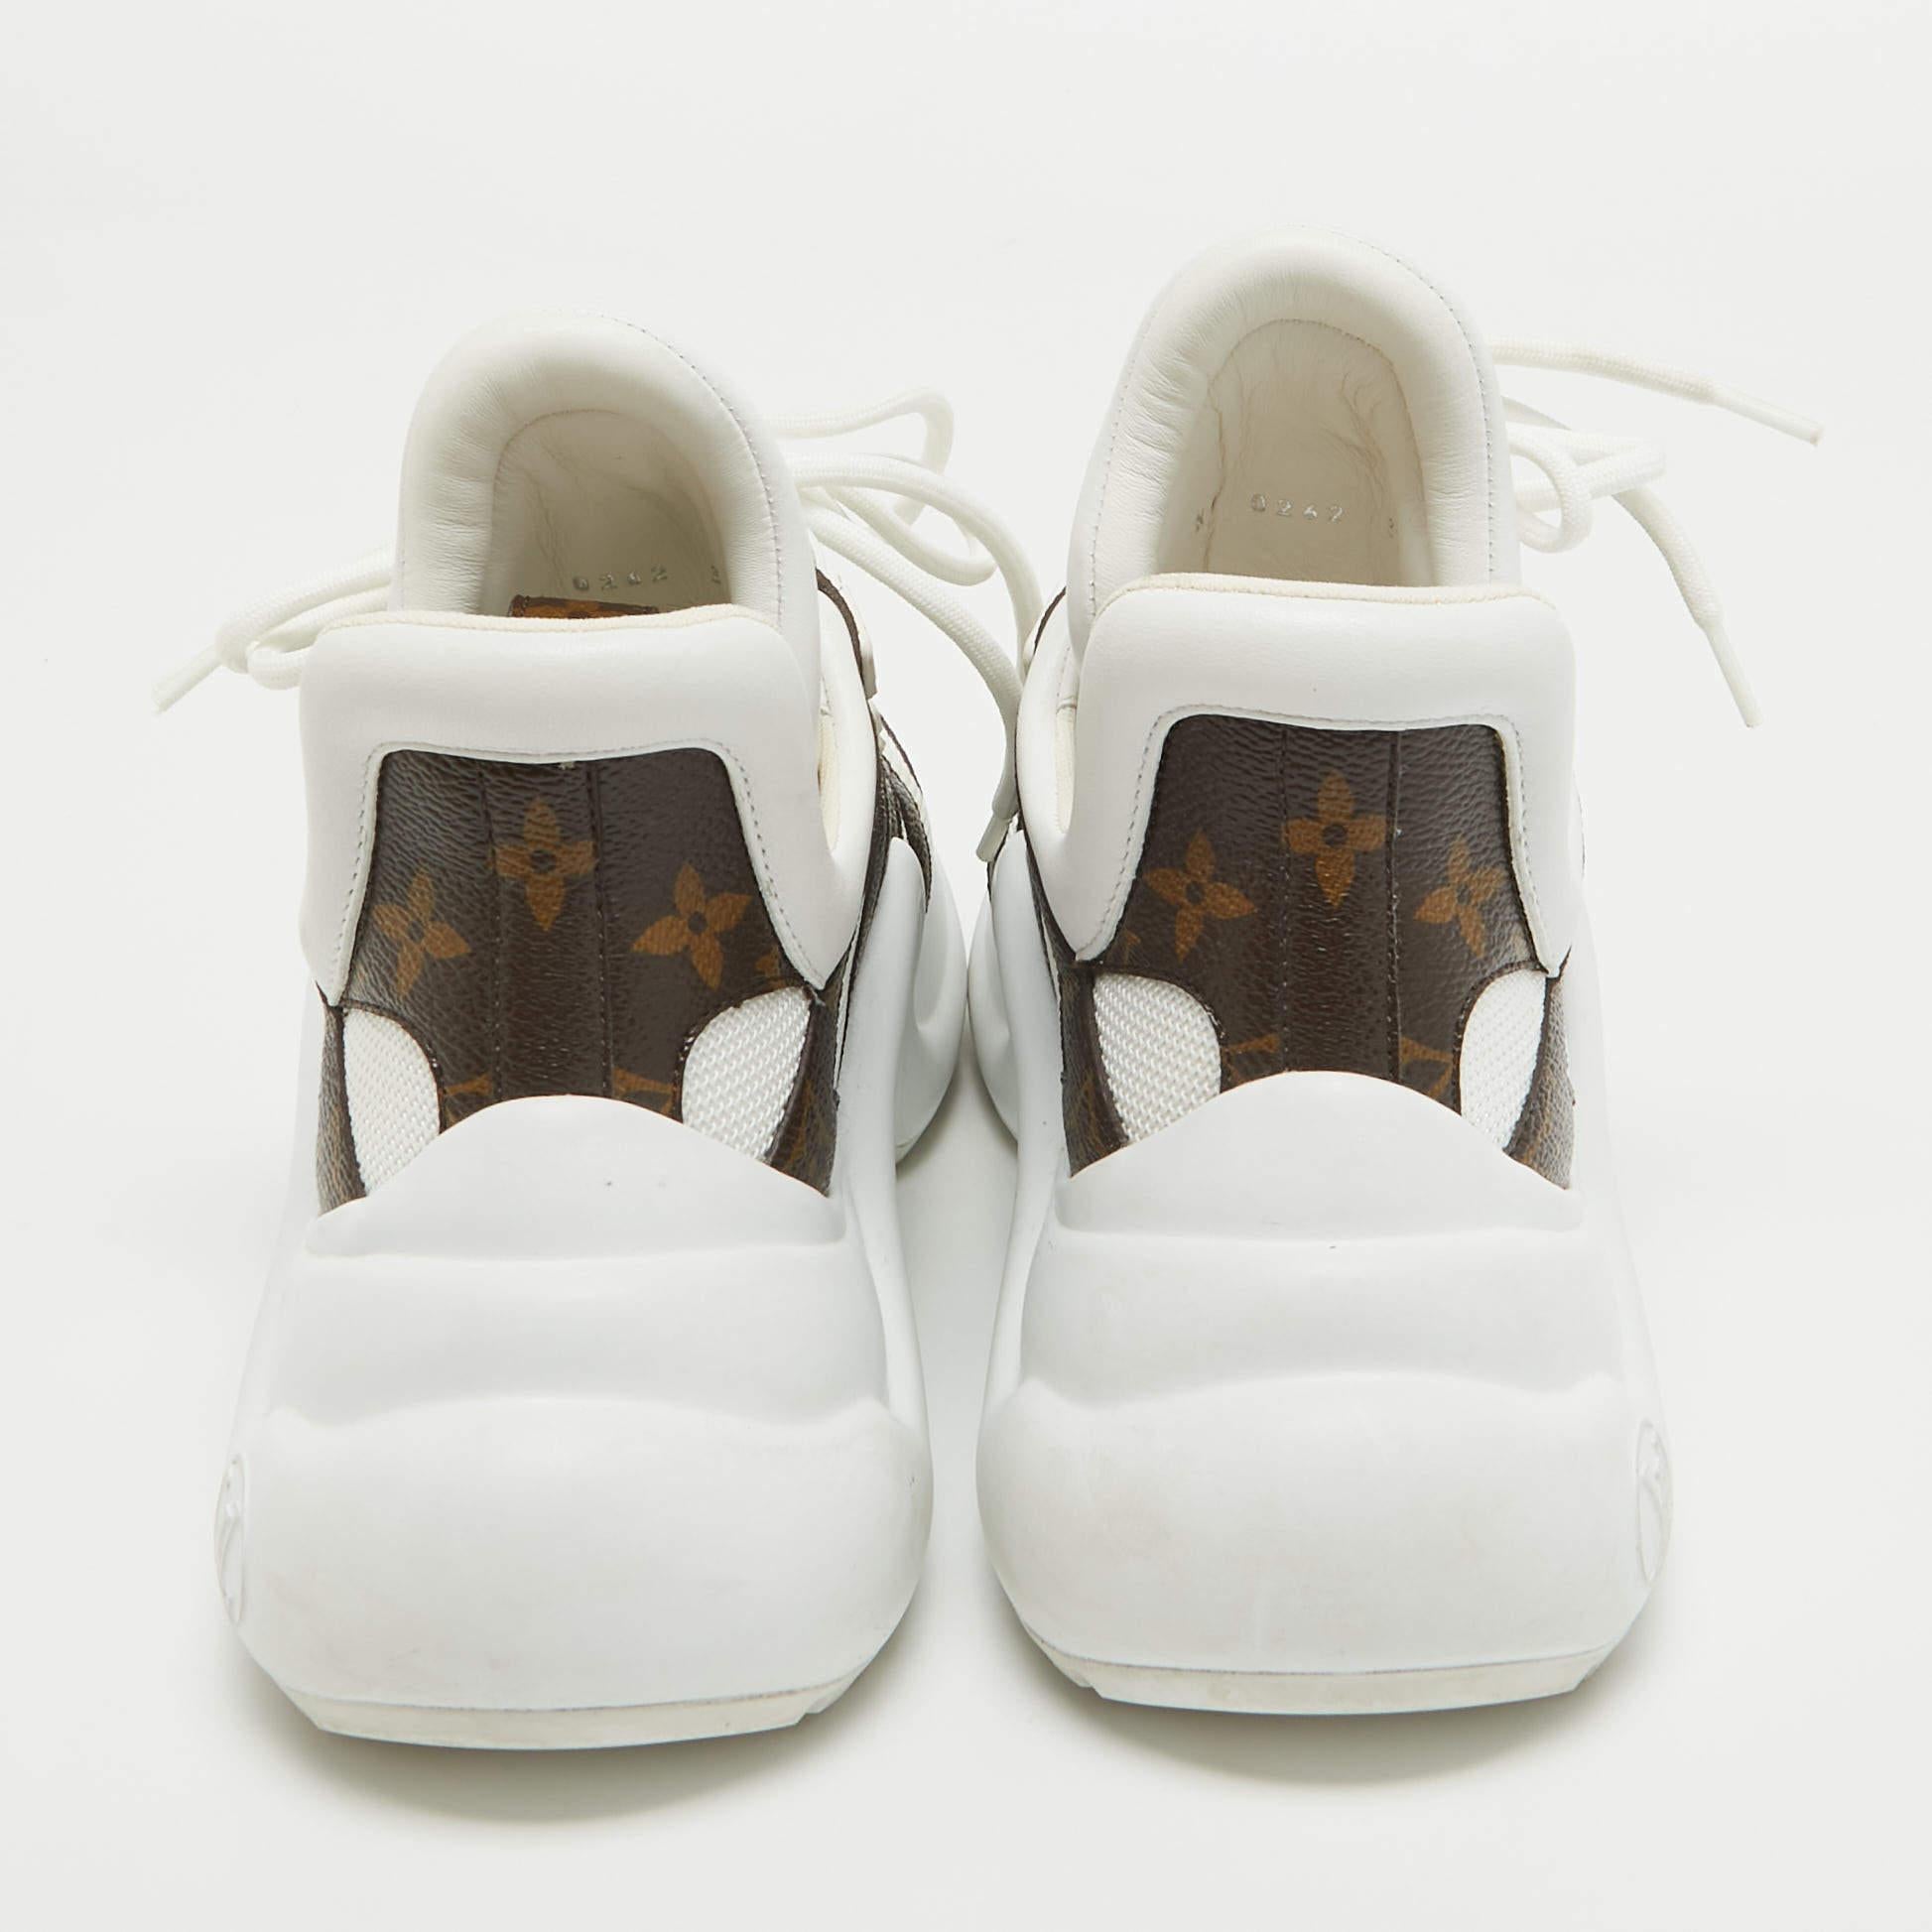 Women's Louis Vuitton White Mesh and Monogram Canvas Archlight Sneakers Size 37.5